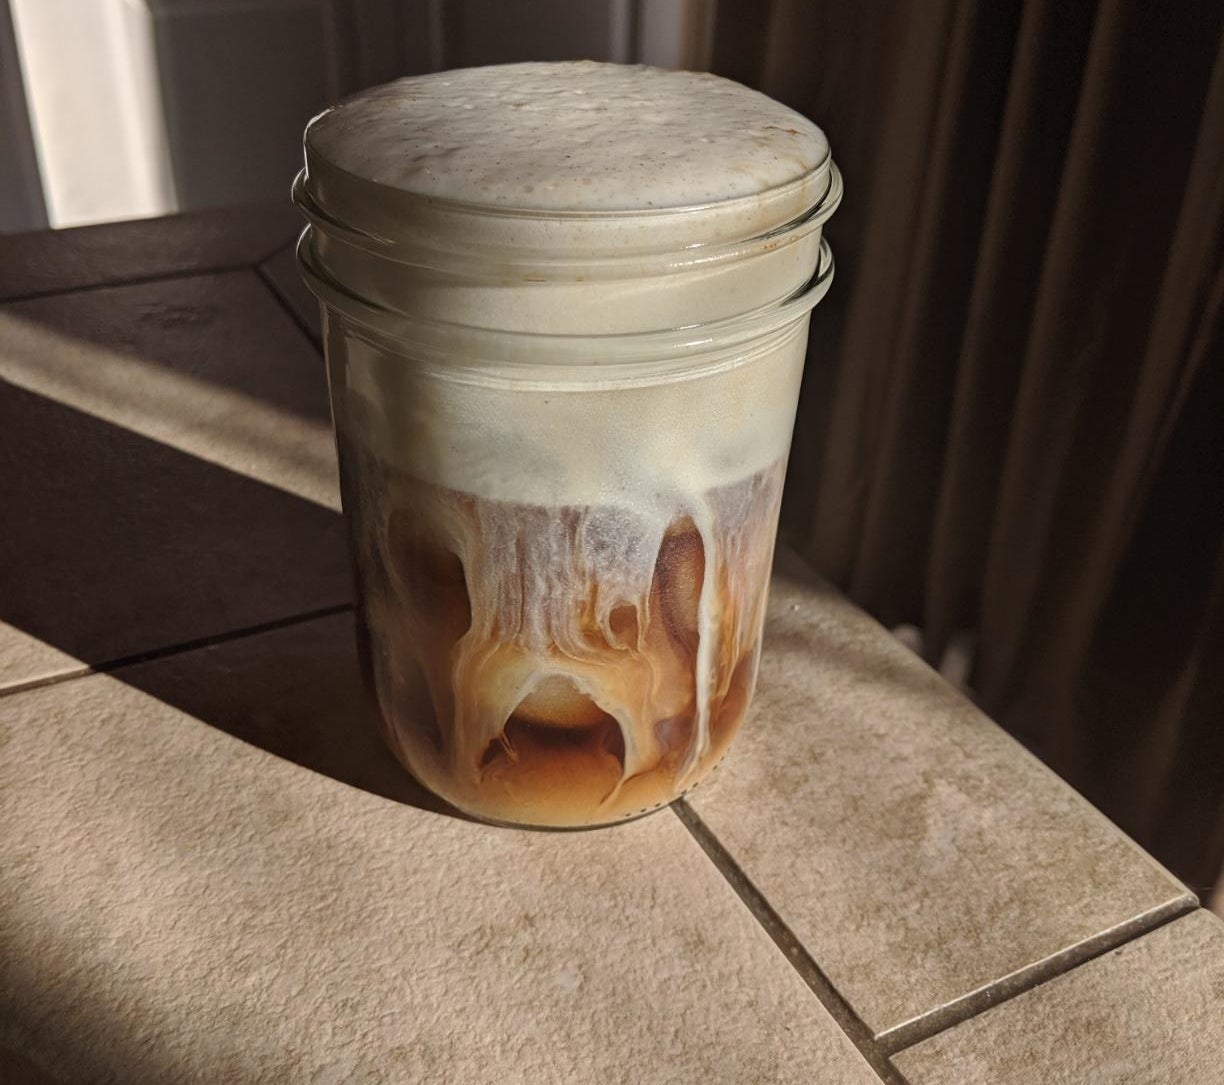 A mason jar with iced coffee and thick foam